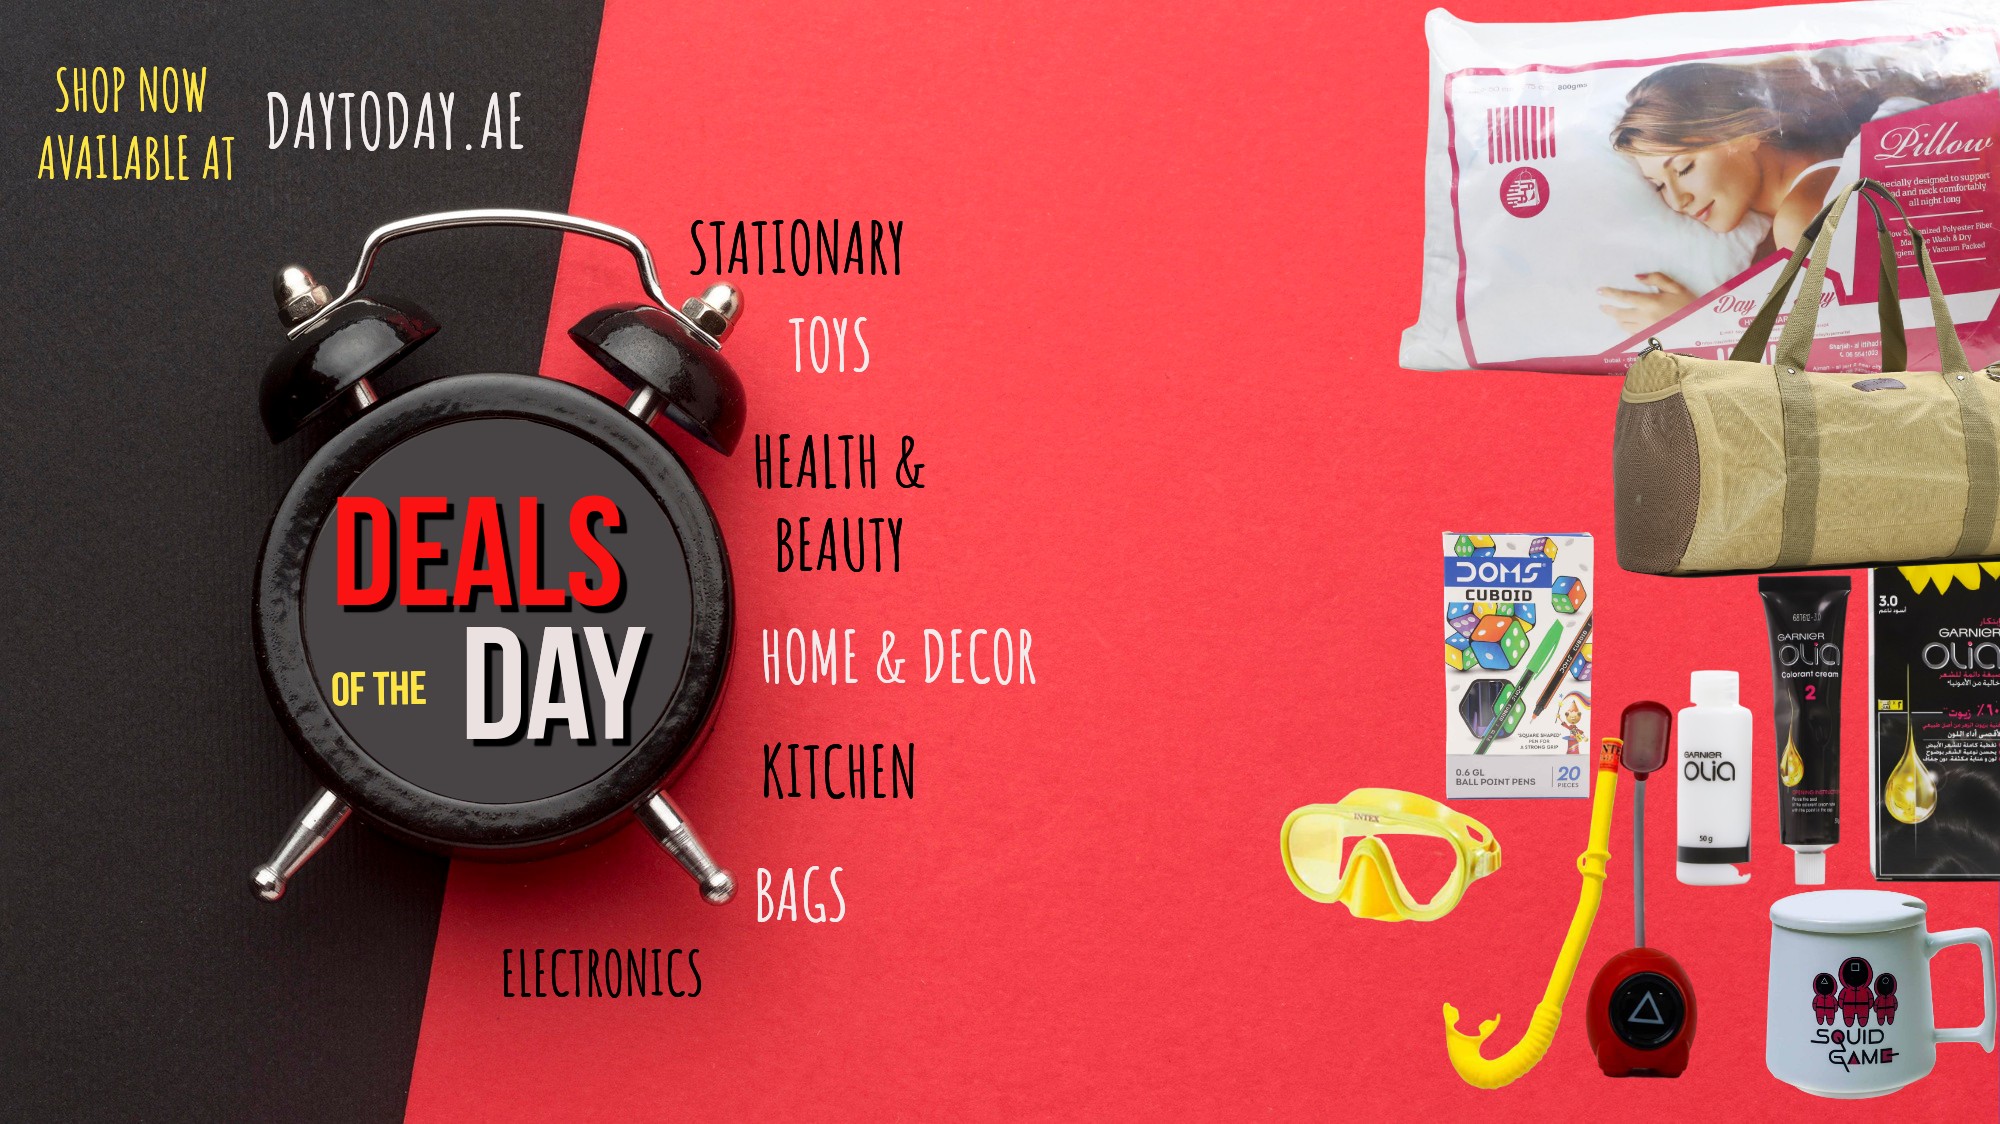 NEW DEALS, EVERY DAY AT DAYTODAY.AE